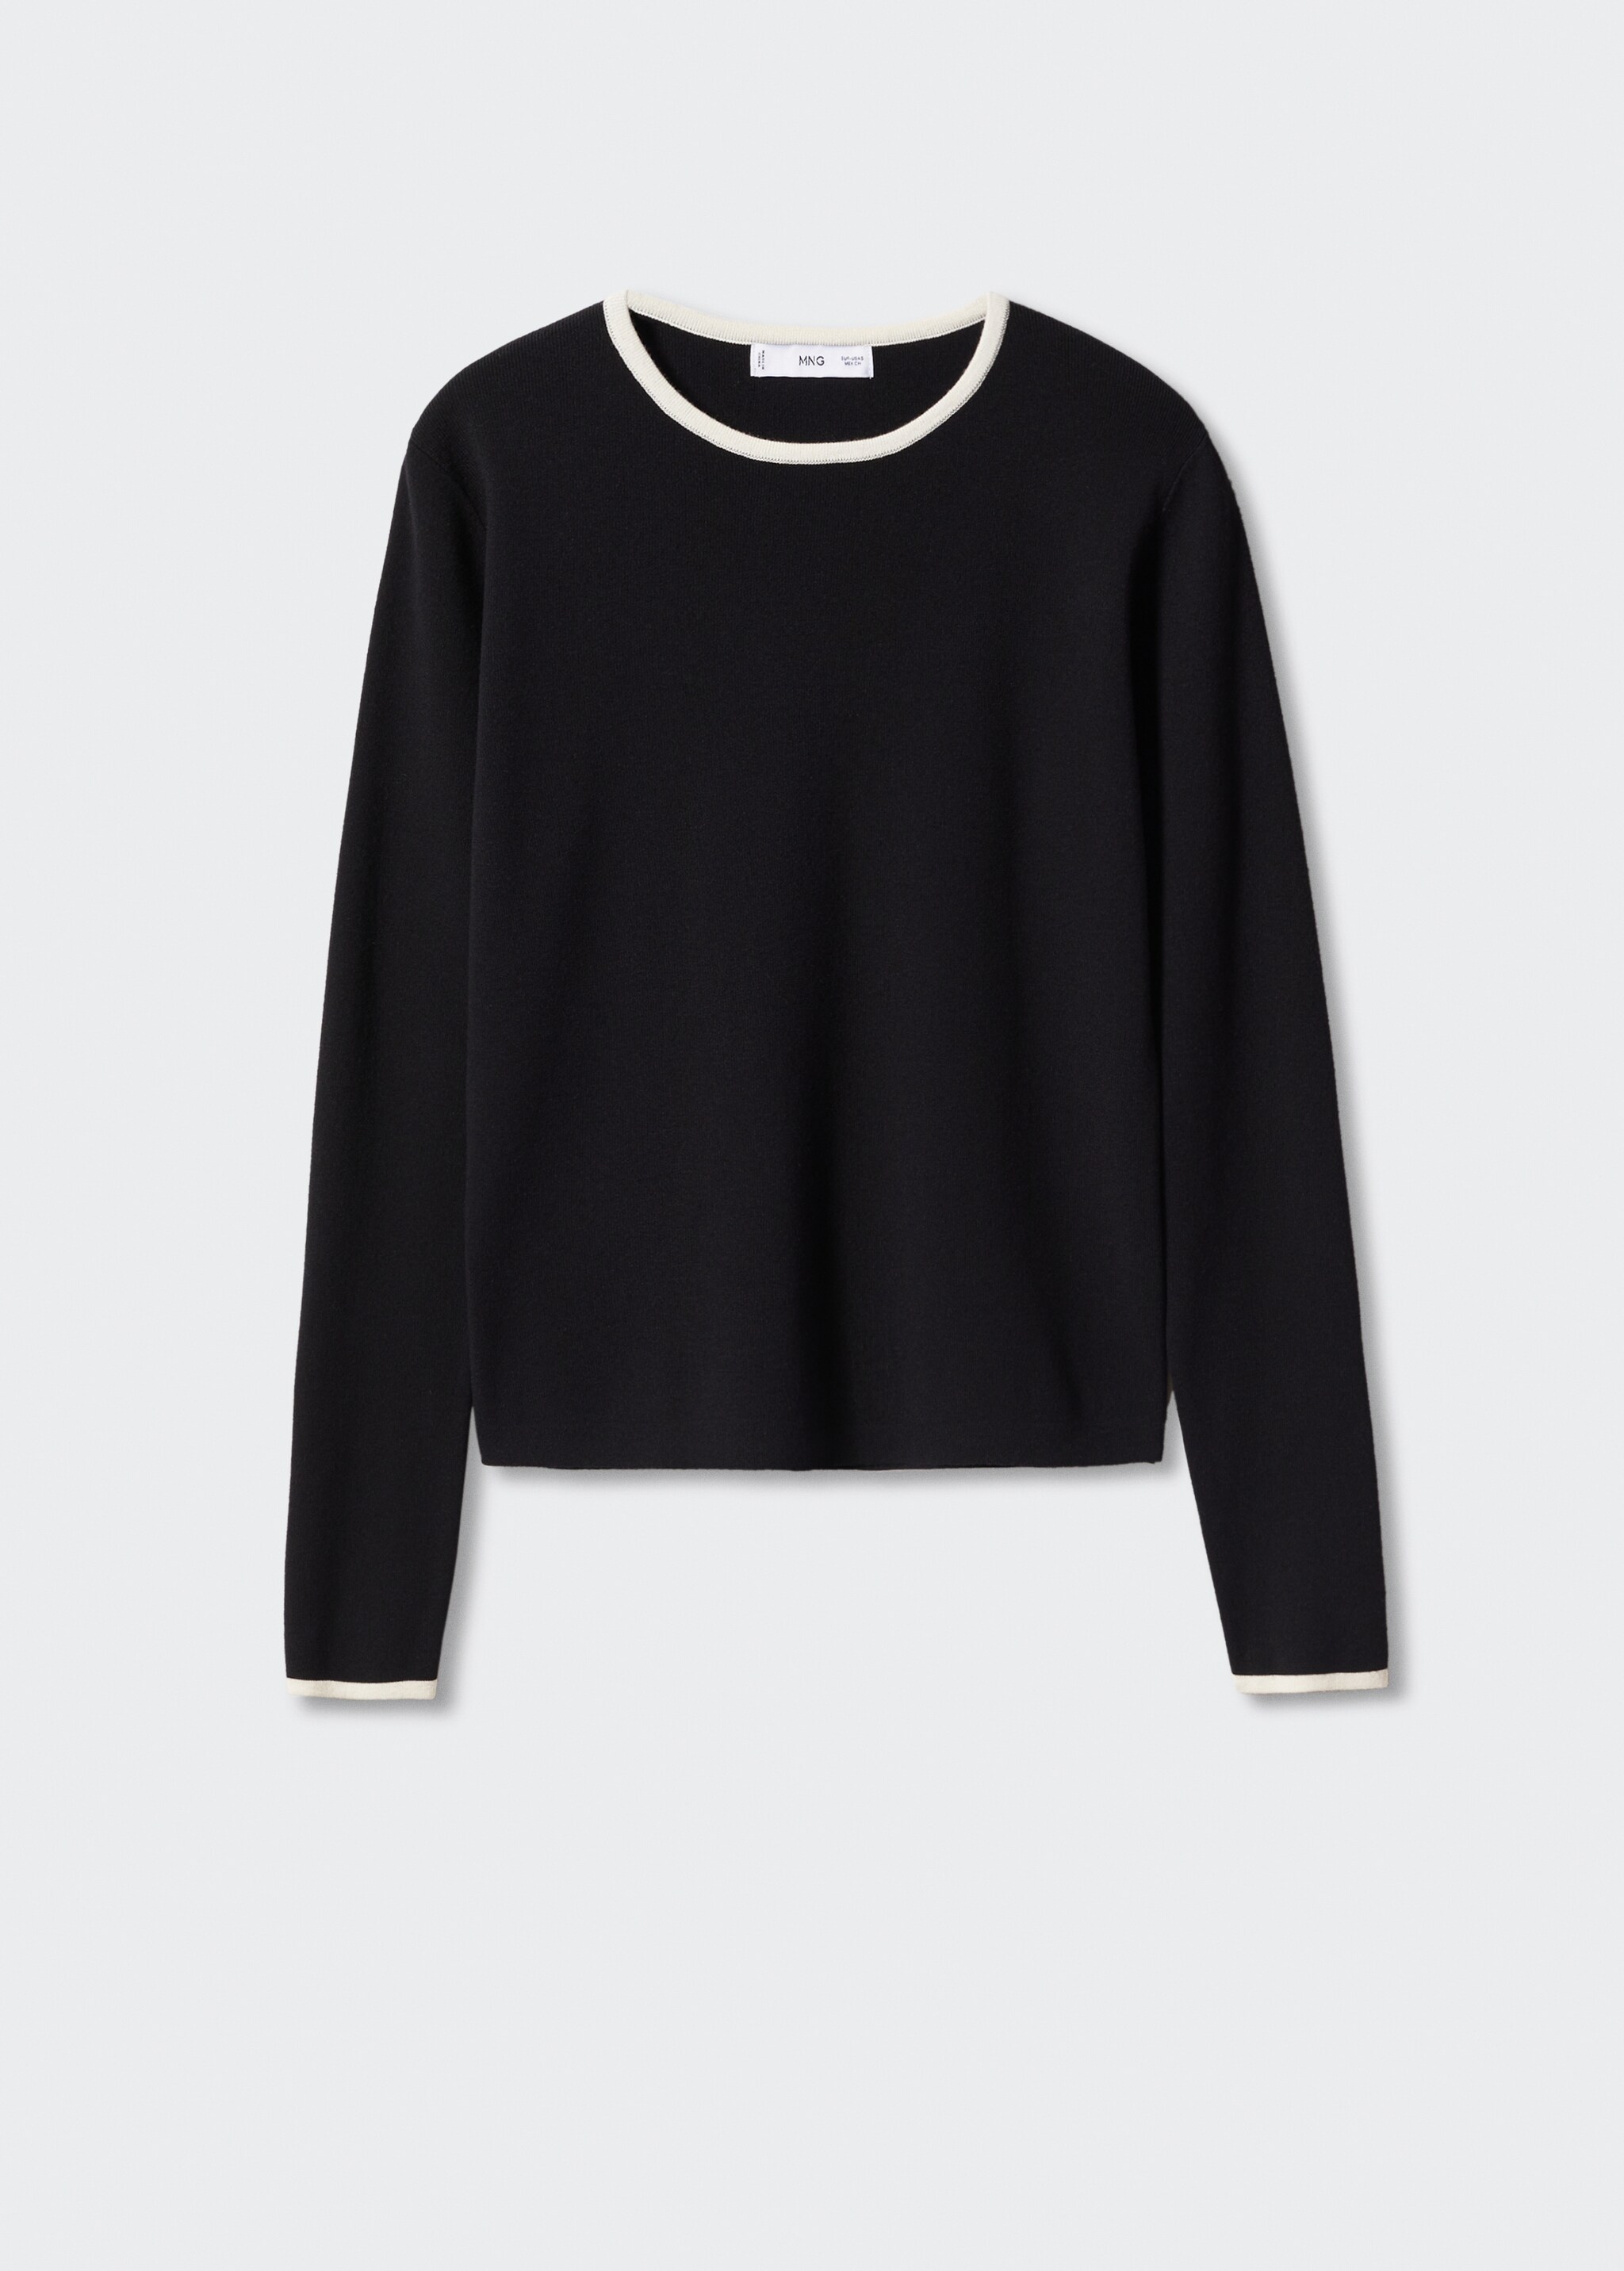 Contrast trim sweater - Article without model